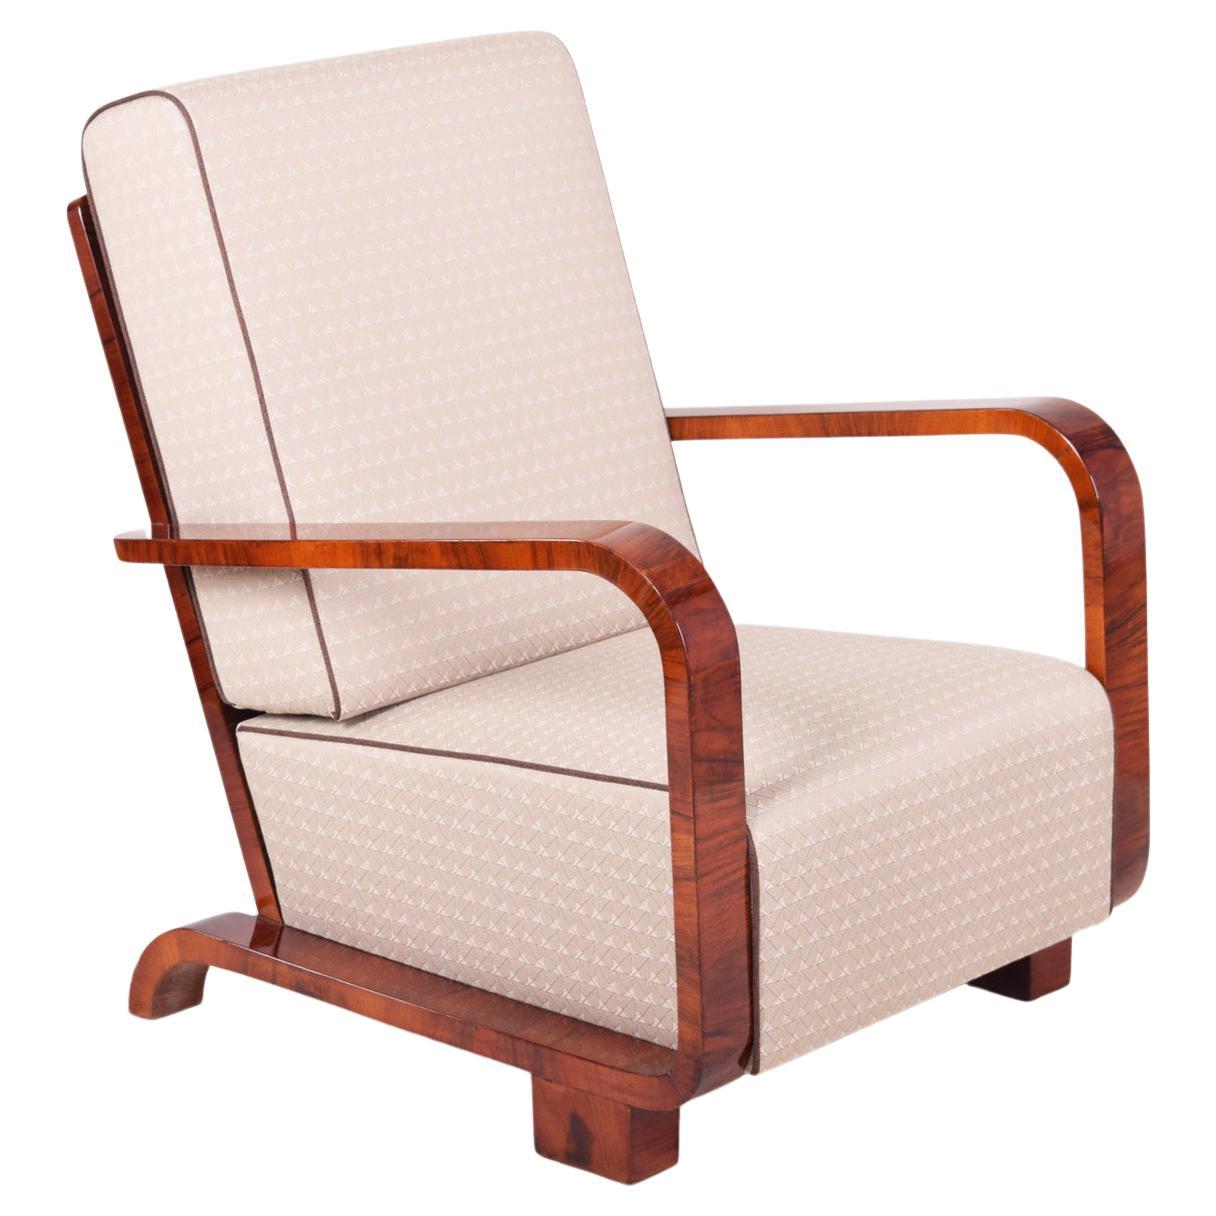 White Art Deco Armchair from Czechia, 1920s, Walnut, Restored Upholstery For Sale